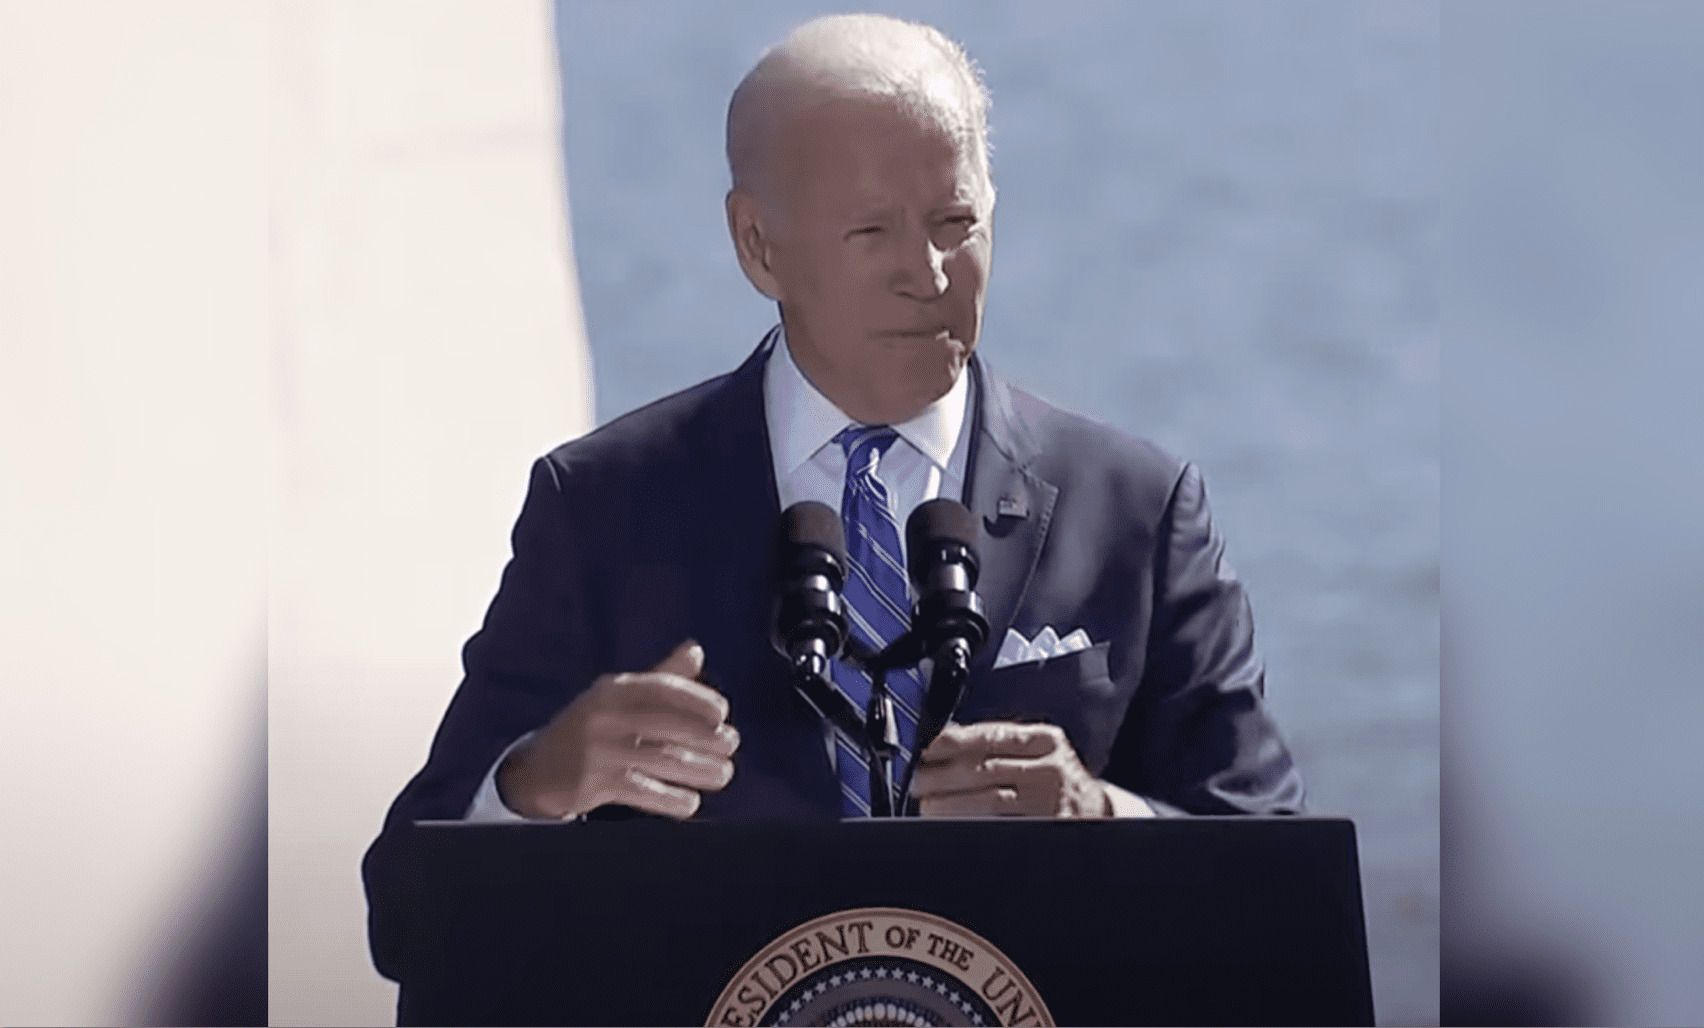 FACT CHECK: Did Joe Biden Really Say "I am not your President...Donald Trump is your President"?